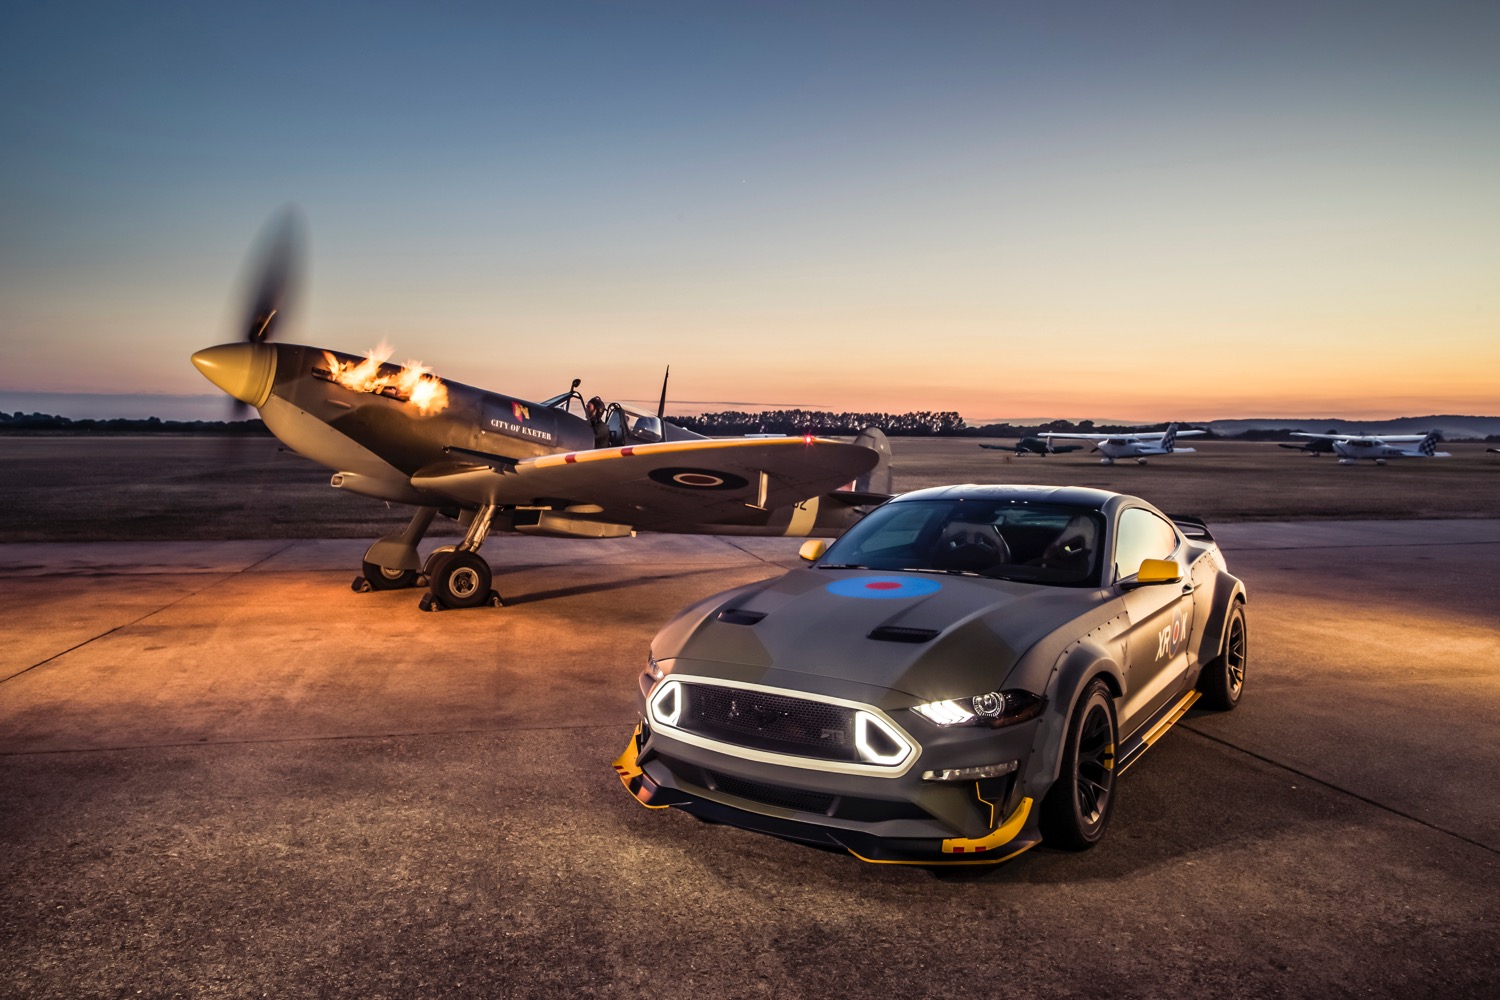 Ford Will Auction Off This Mustang Inspired by RAF Fighters From